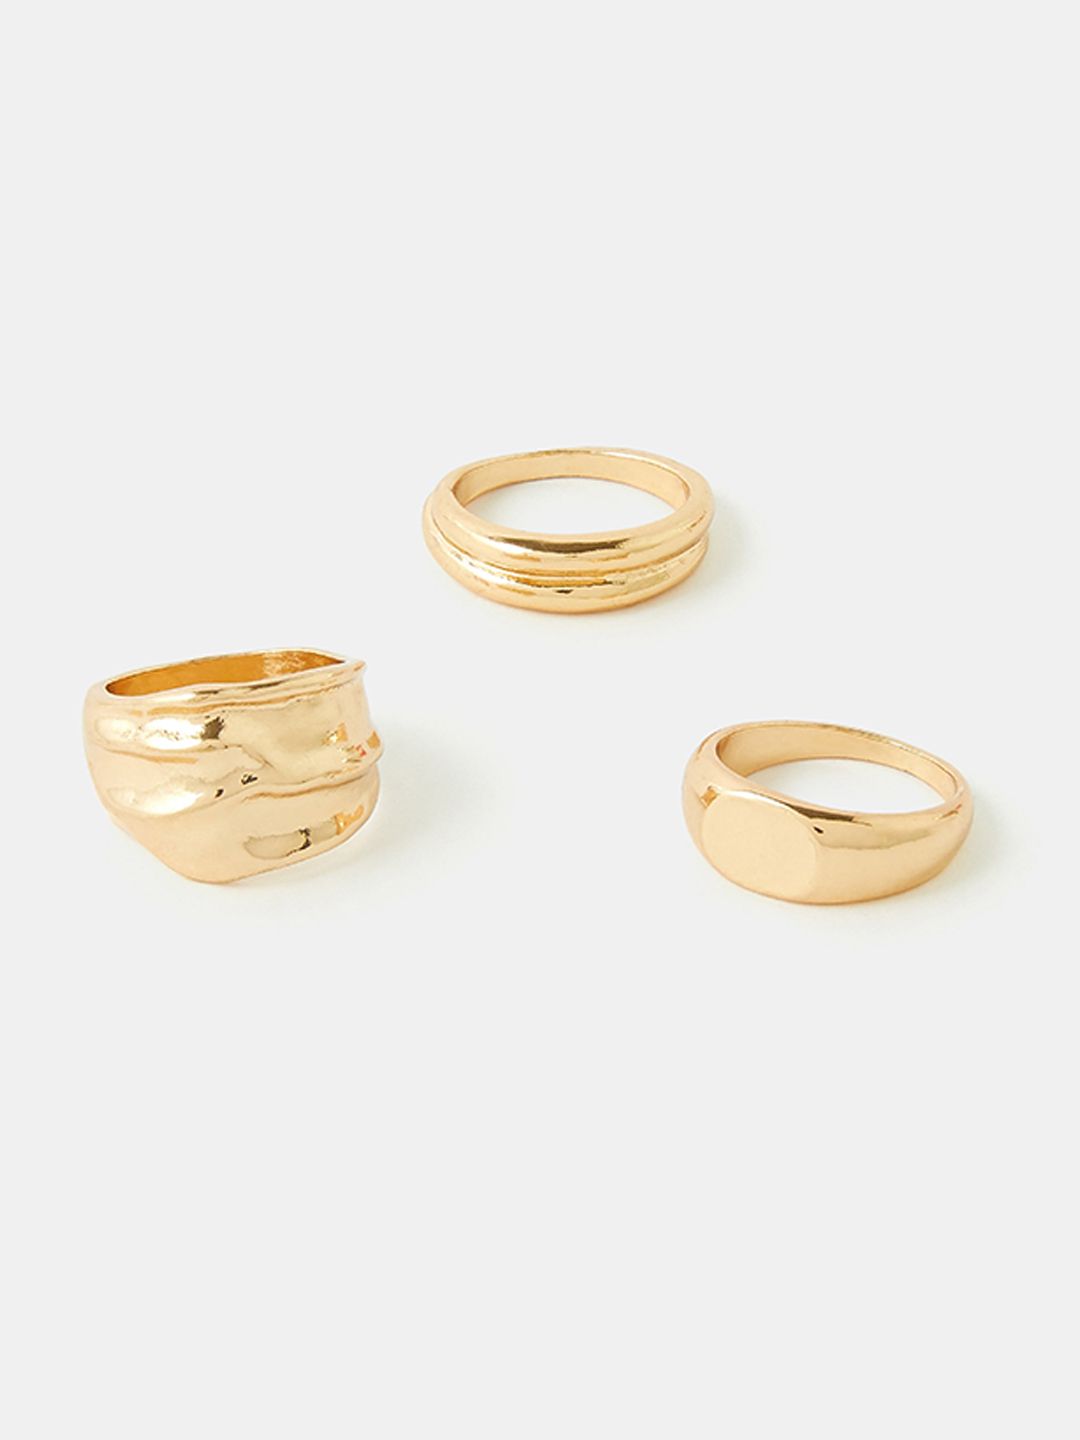 Accessorize Women Set Of 3 Gold-Plated Chunky Finger Rings Price in India